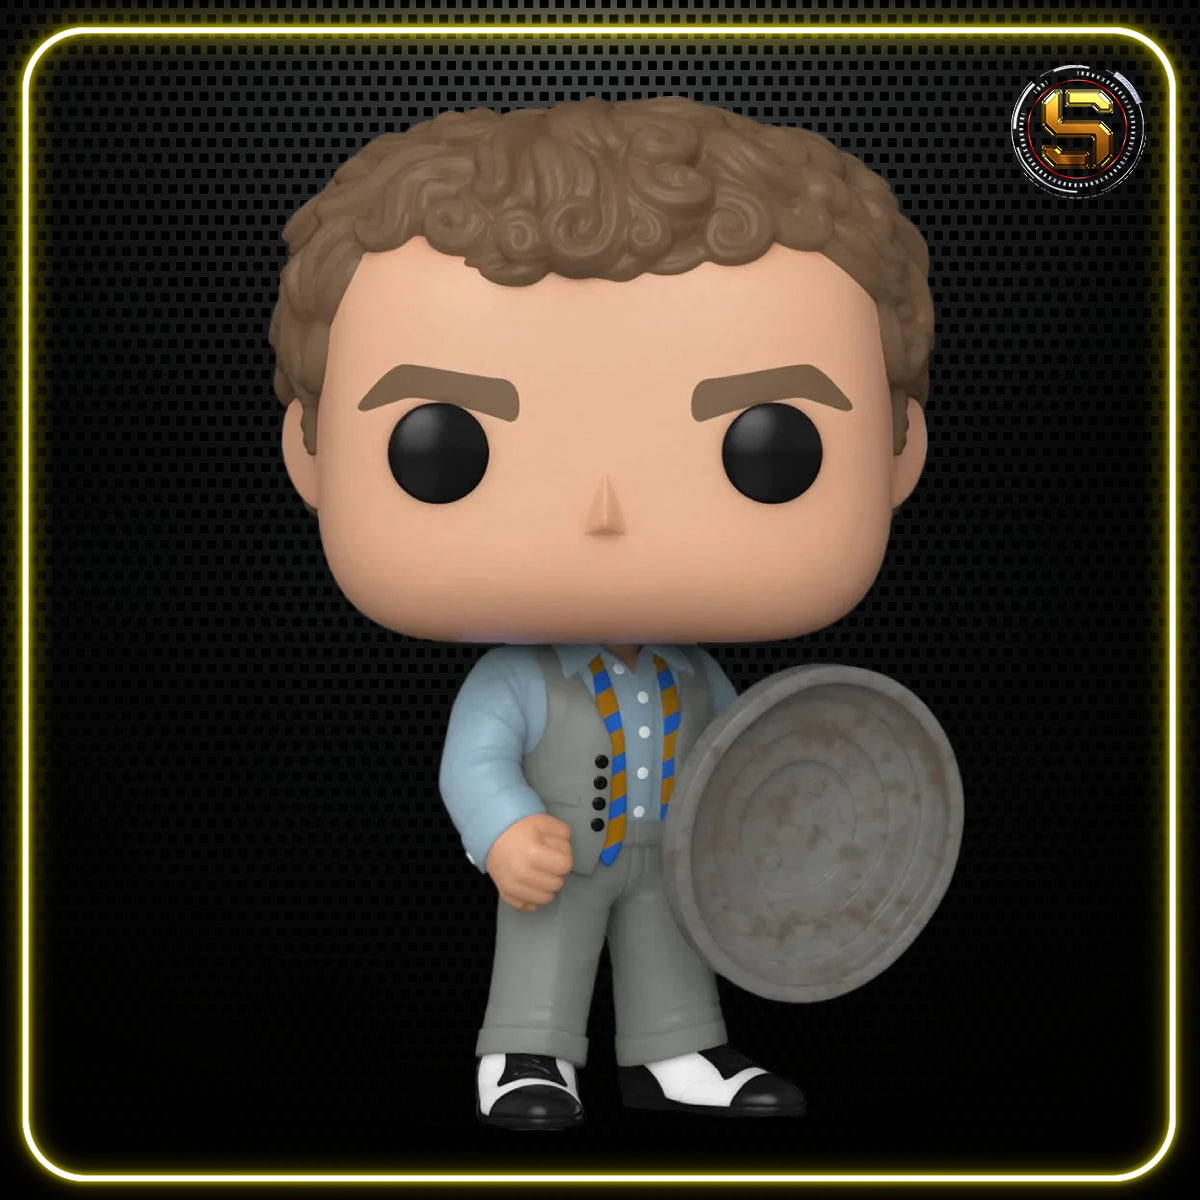 FUNKO POP MOVIES THE GODFATHER 50TH SONNY CORLEONE 1202